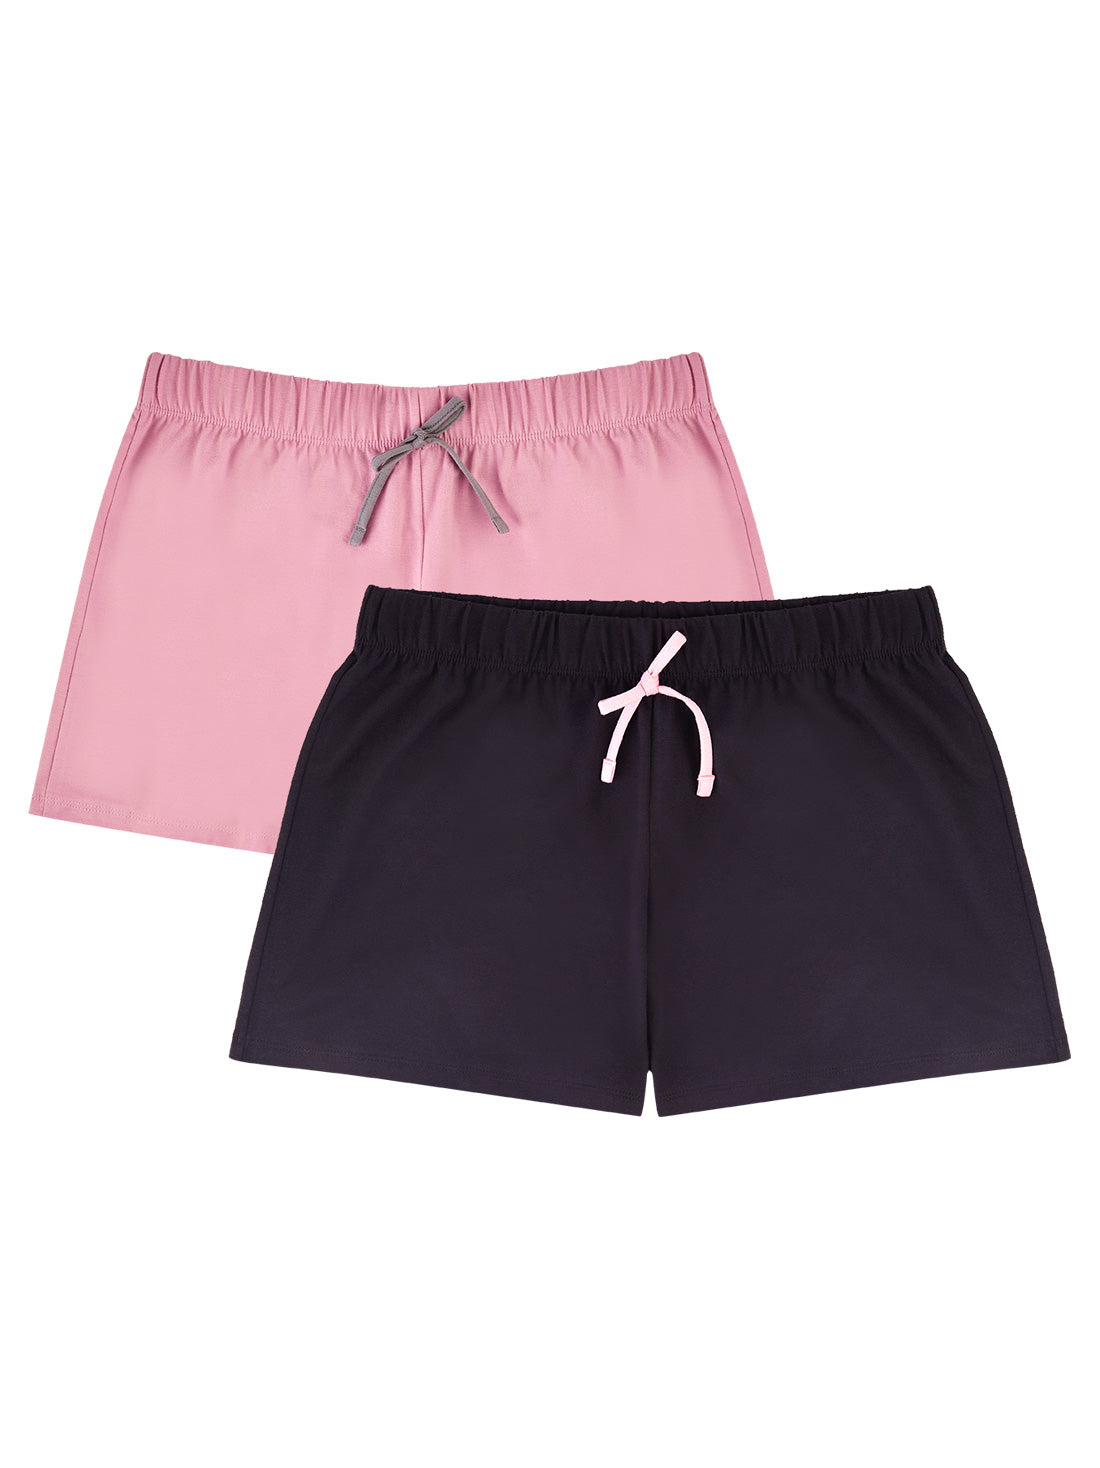 Two-Pack Shorts - 79019 - Affordable & Stylish! | Ilusion